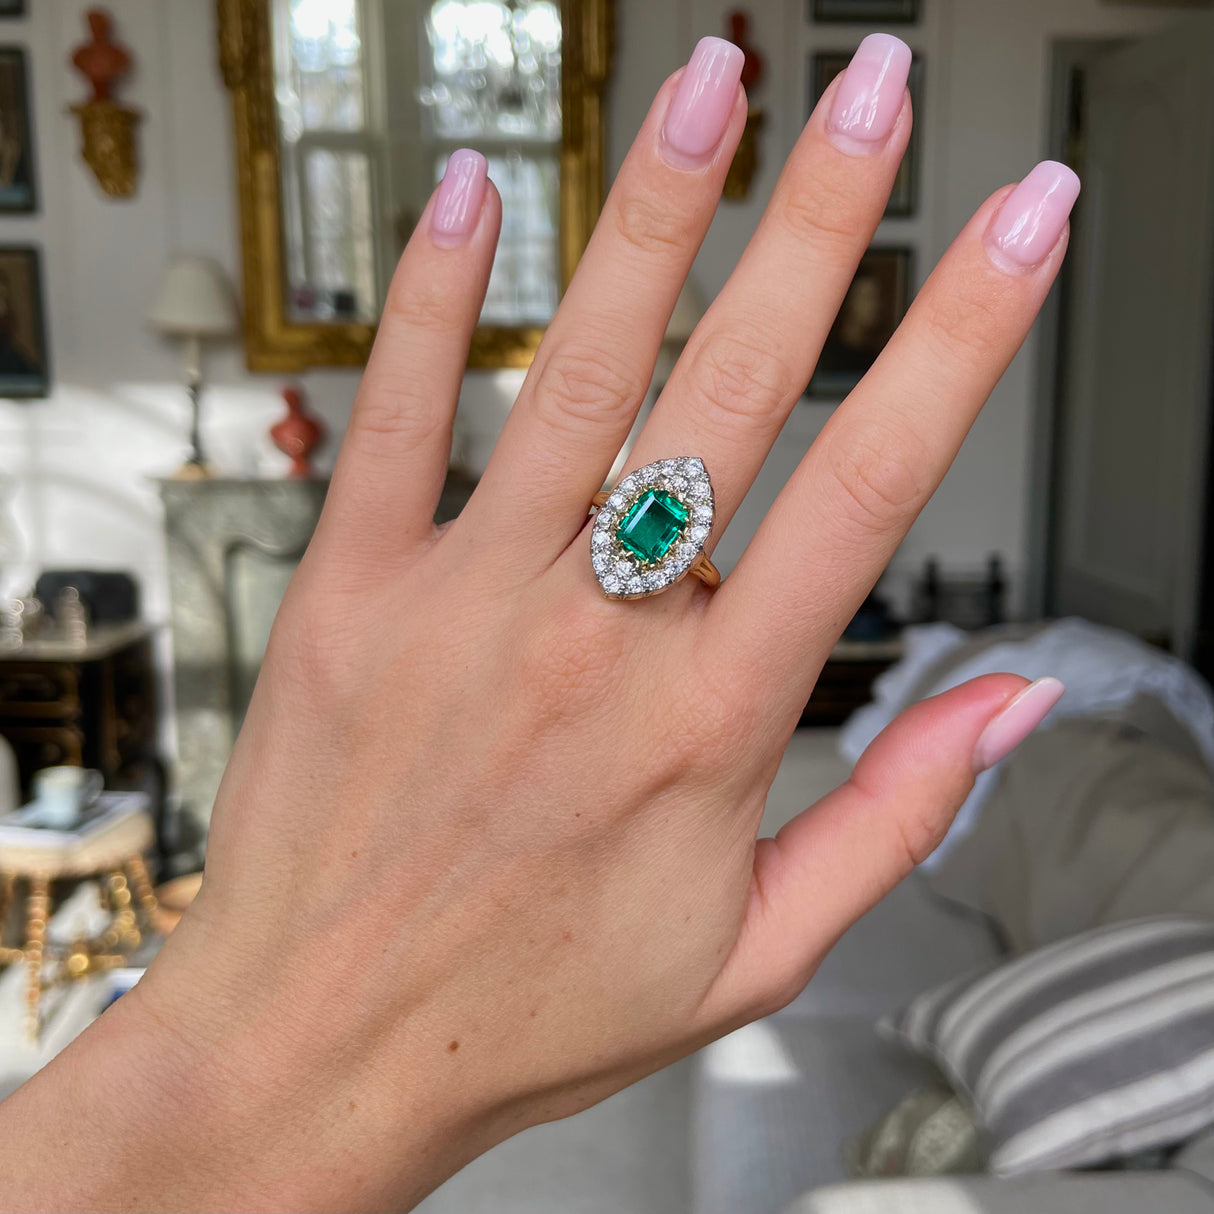 Emerald and diamond navette ring, worn on hand.